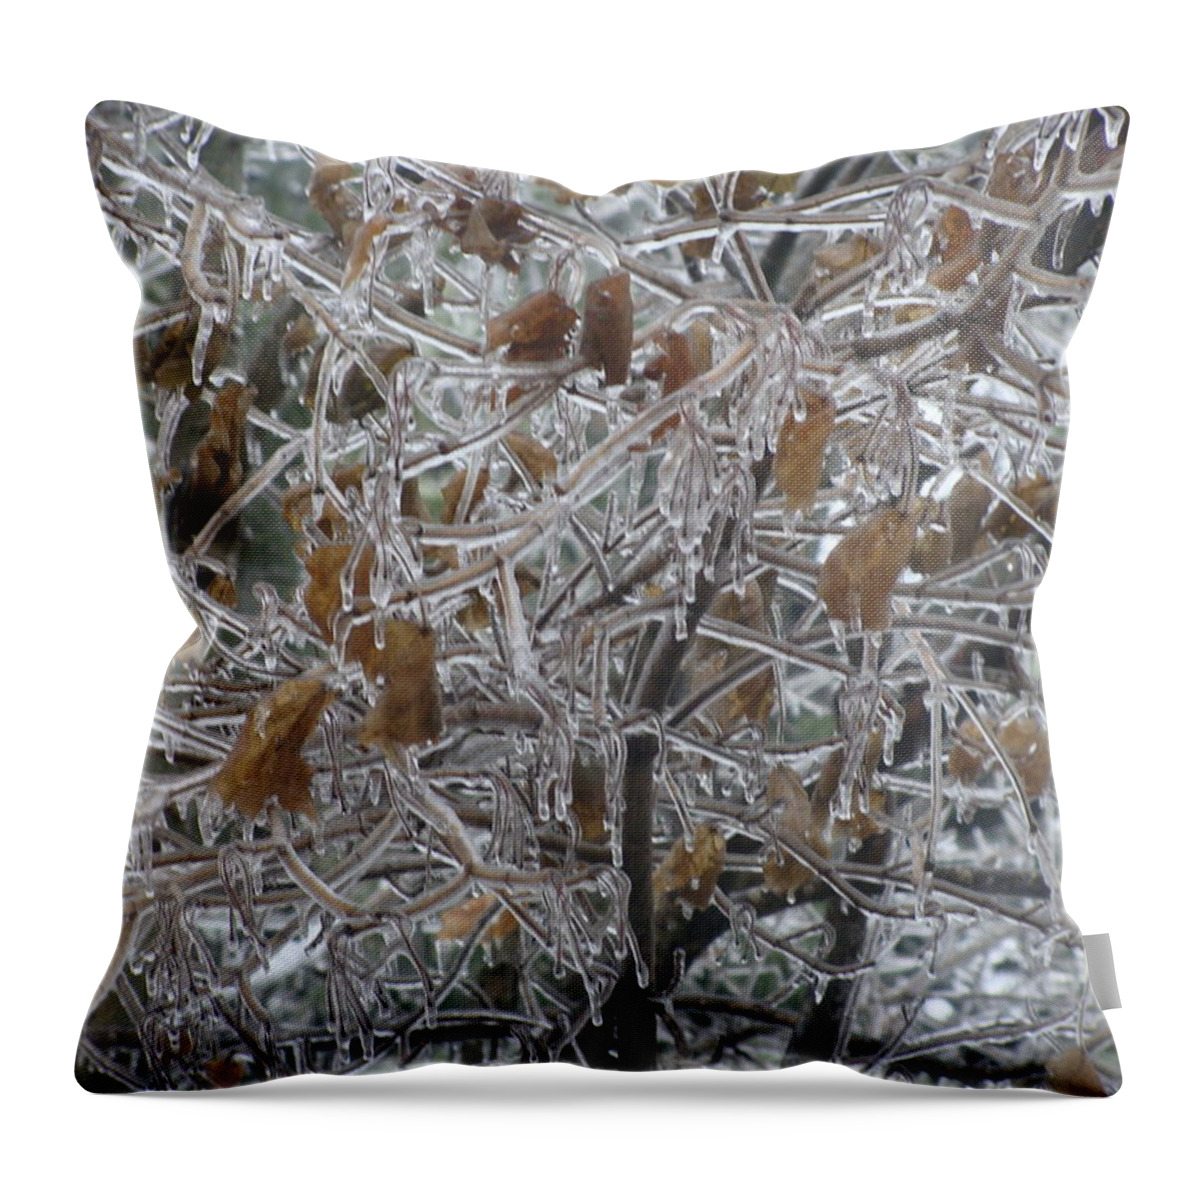 Frozen Throw Pillow featuring the photograph Pretty as Glass by Stacie Siemsen